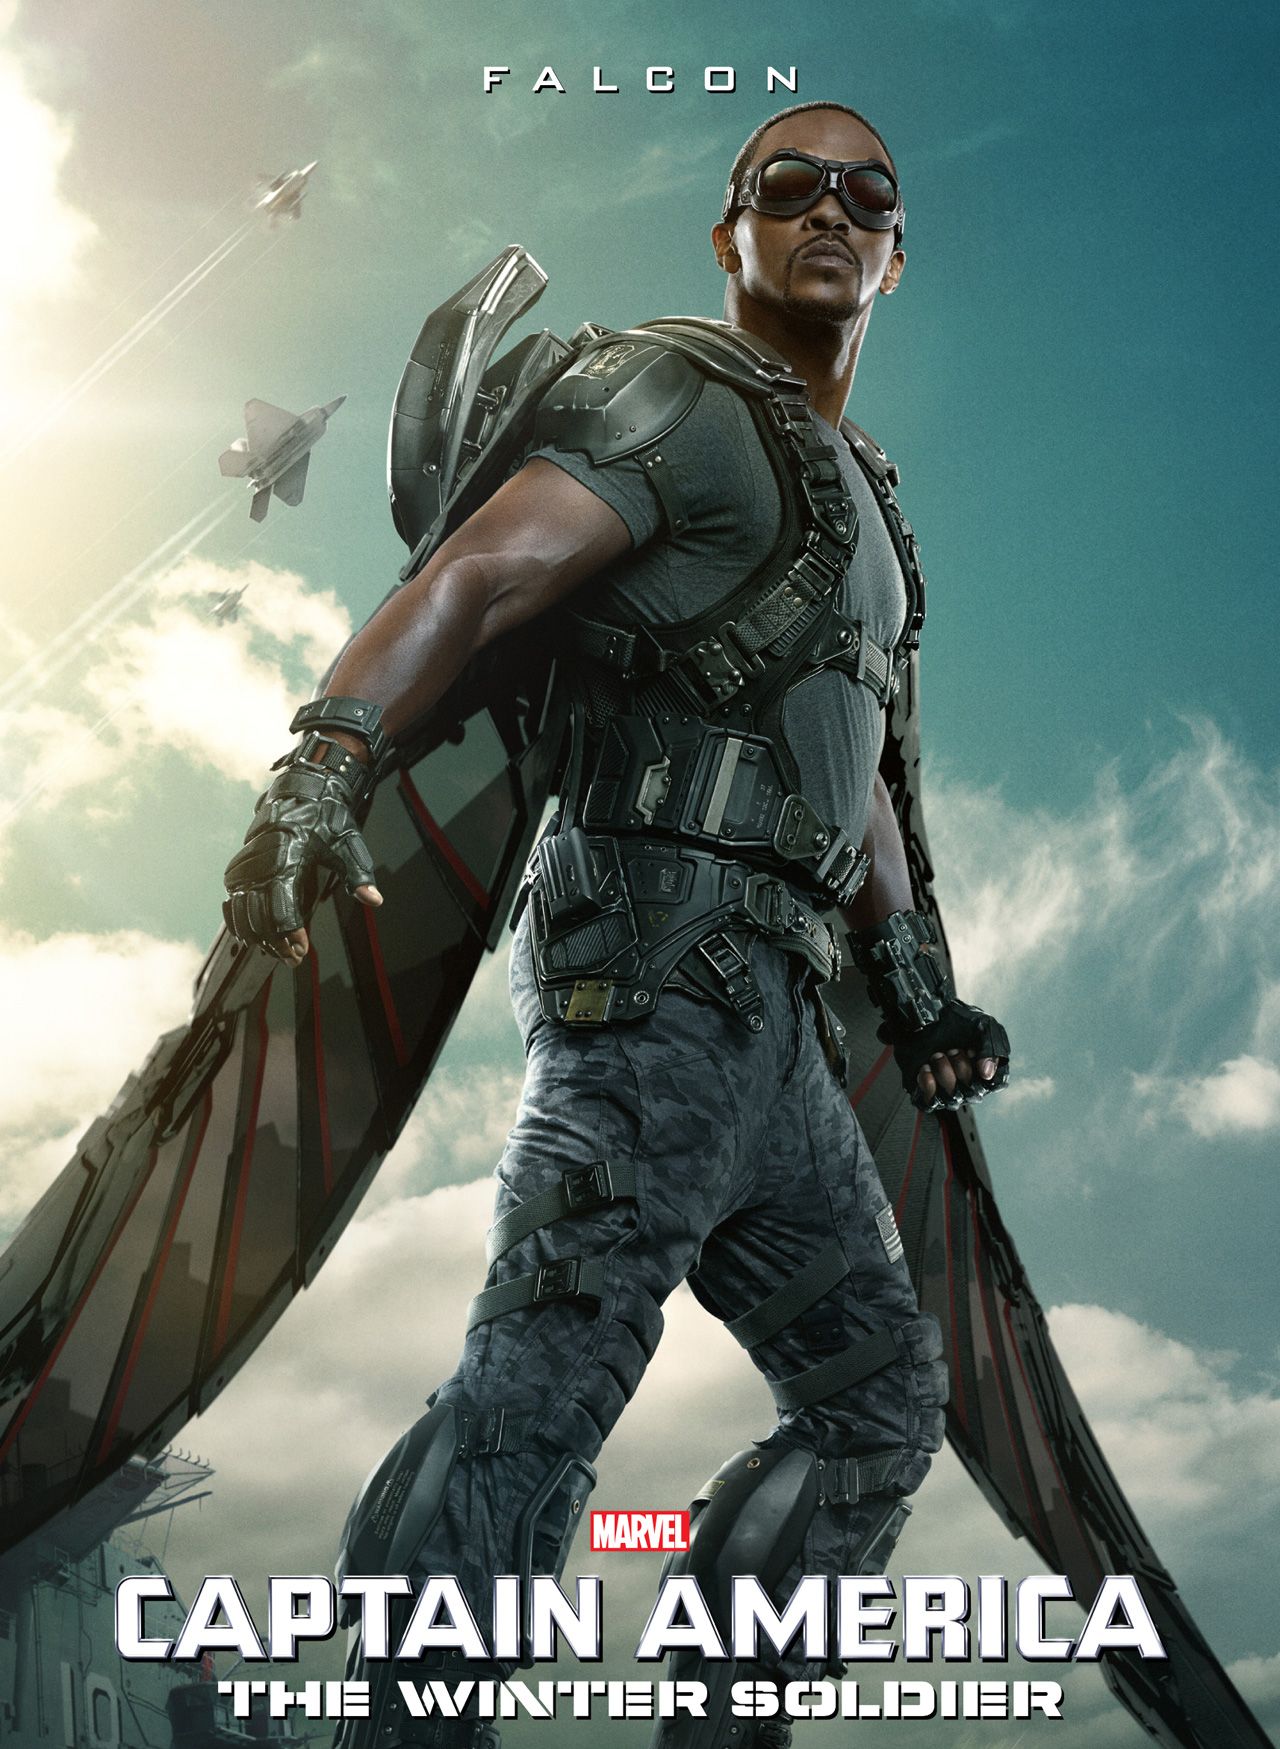 The Falcon character poster for Captain America: The Winter 